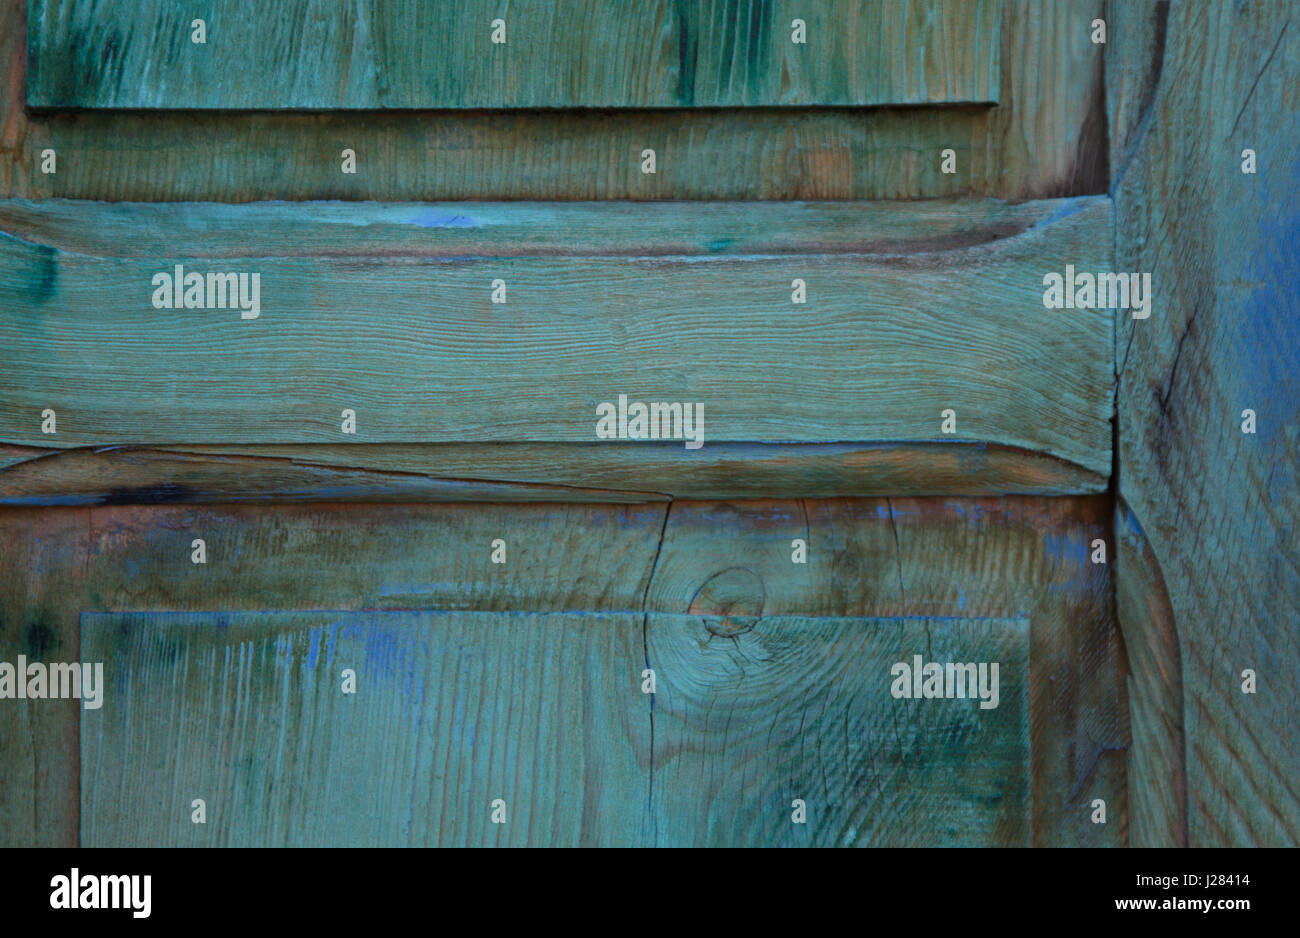 Attractive background of blue hues of wood grain on weathered door.  Location is along Canyon Road in Santa Fe, New Mexico, in America's Southwest. Stock Photo